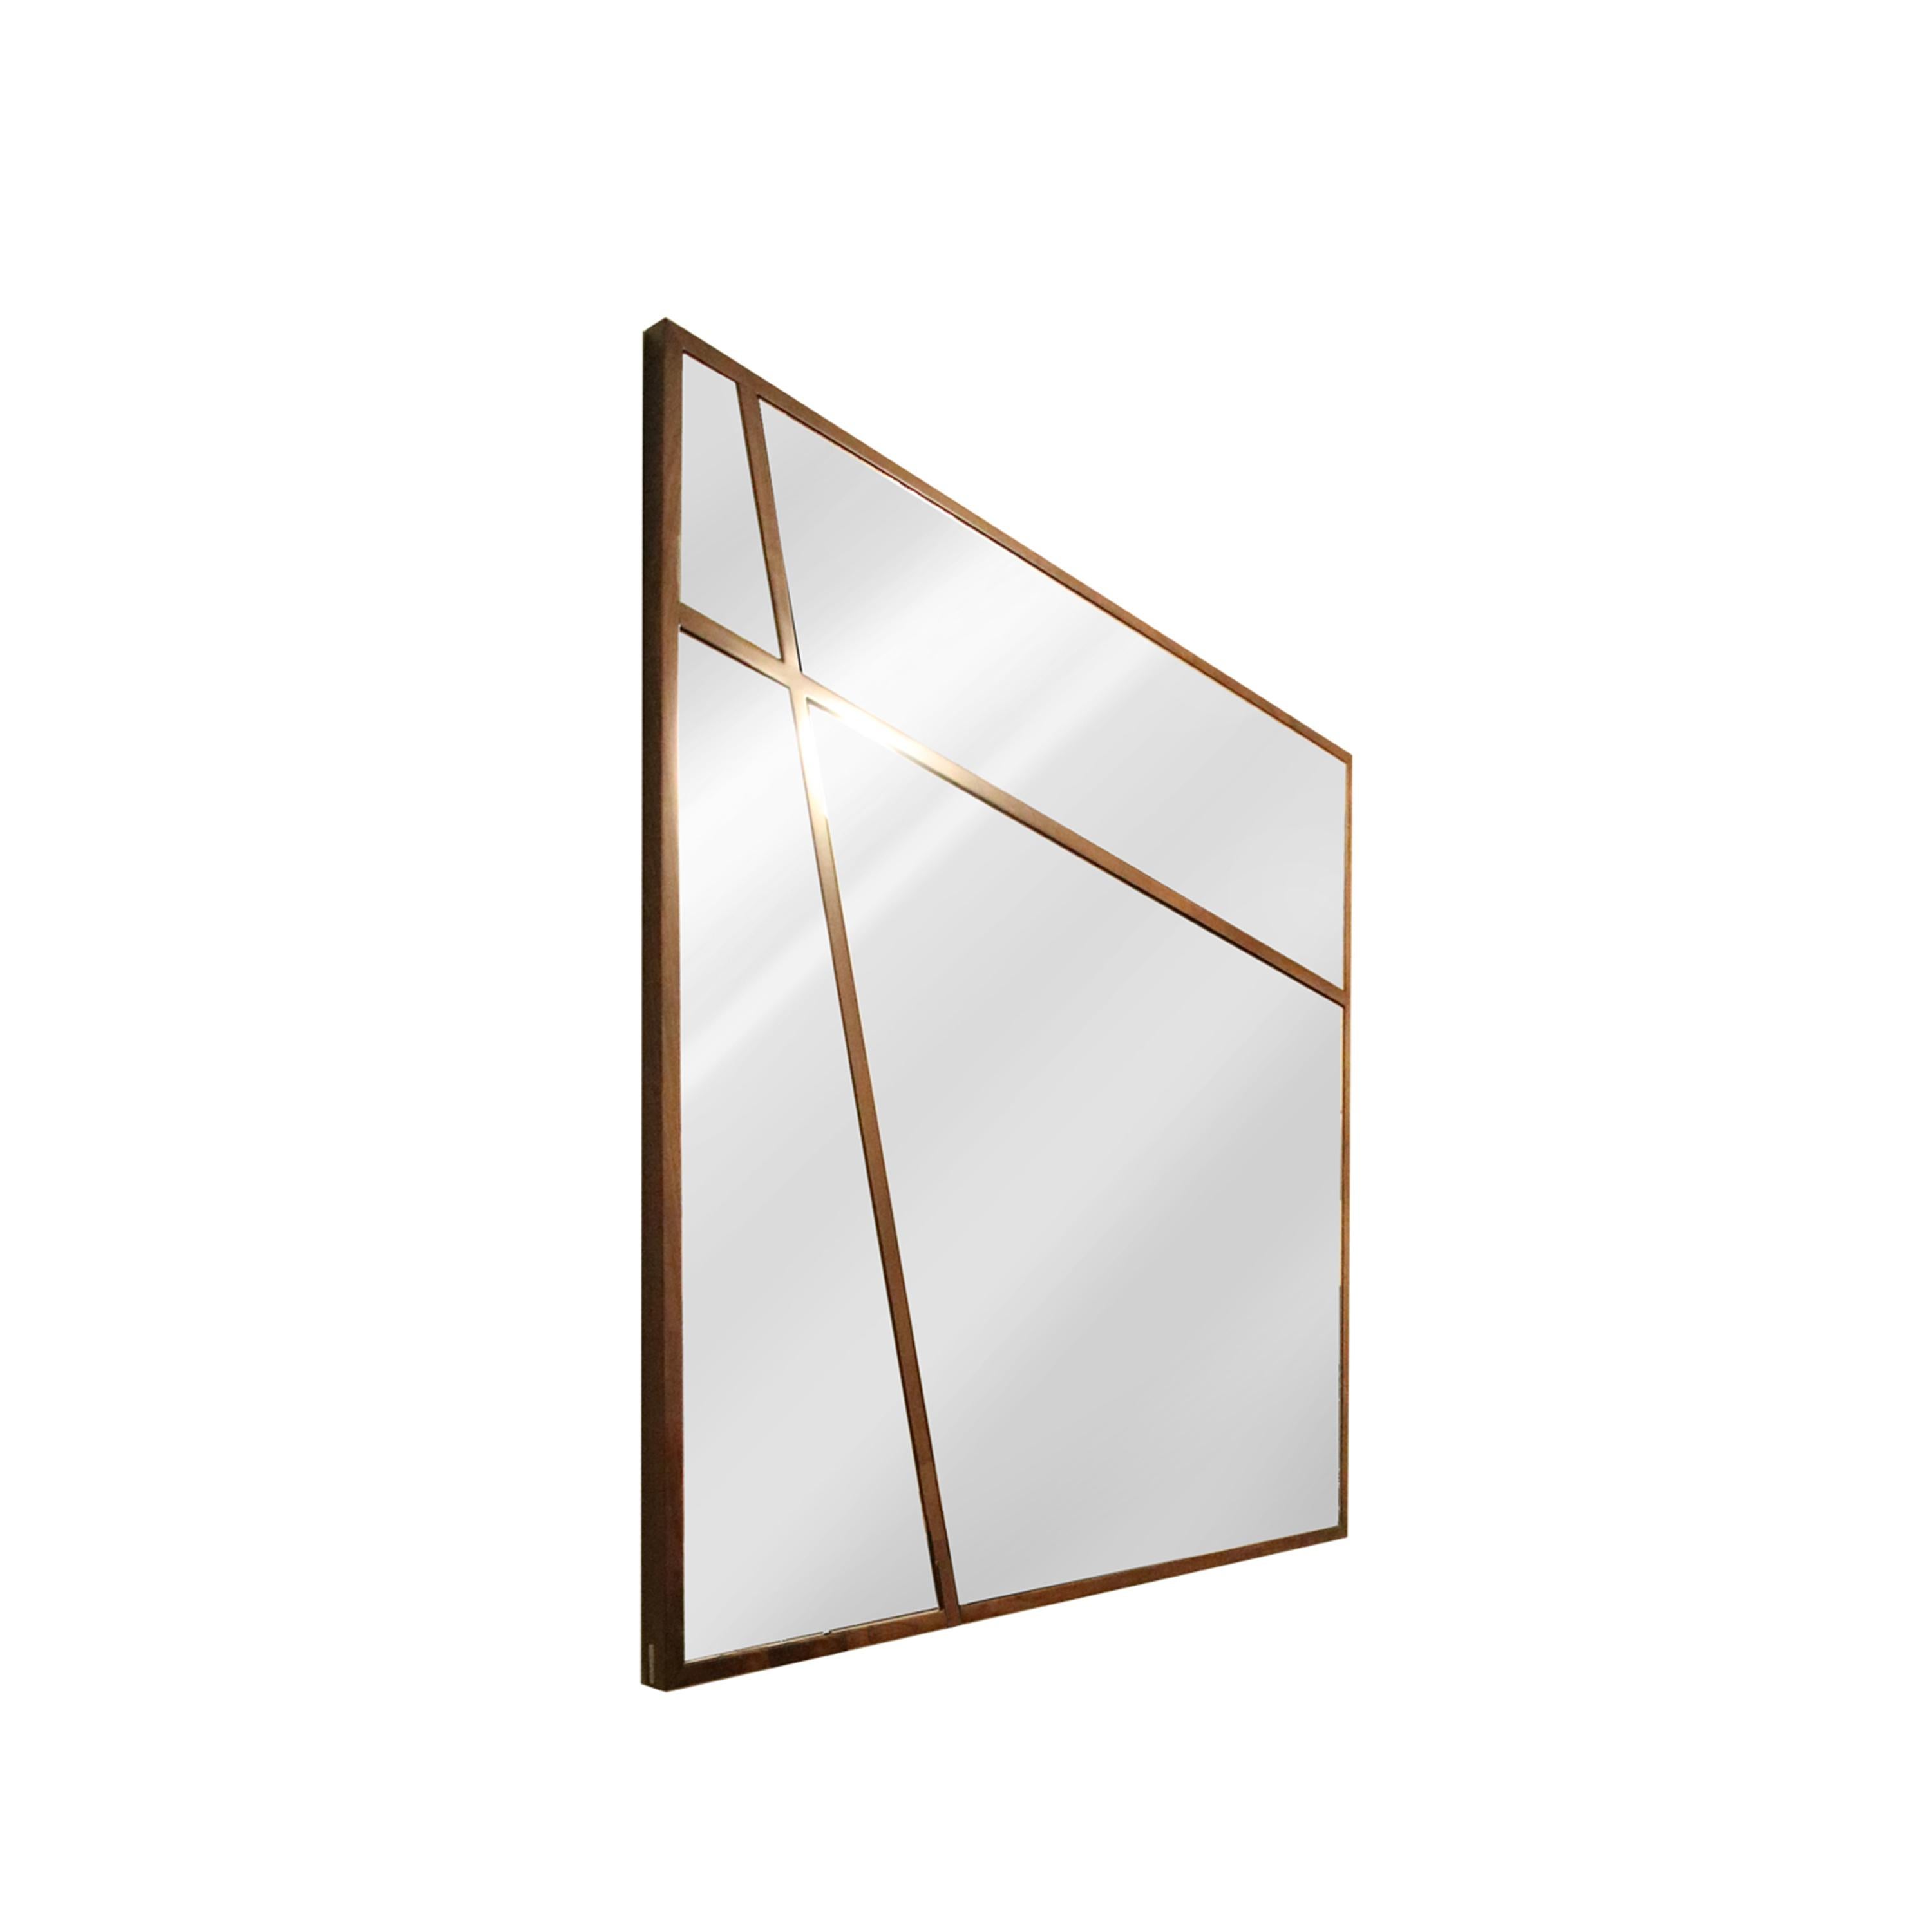 Square clear mirror with wood decorative lines.

As with all our mirrors, this mirror is made to order and is therefore highly customisable, including in size and finish. The customisation fee is only 10%, which is added to the retail price.
